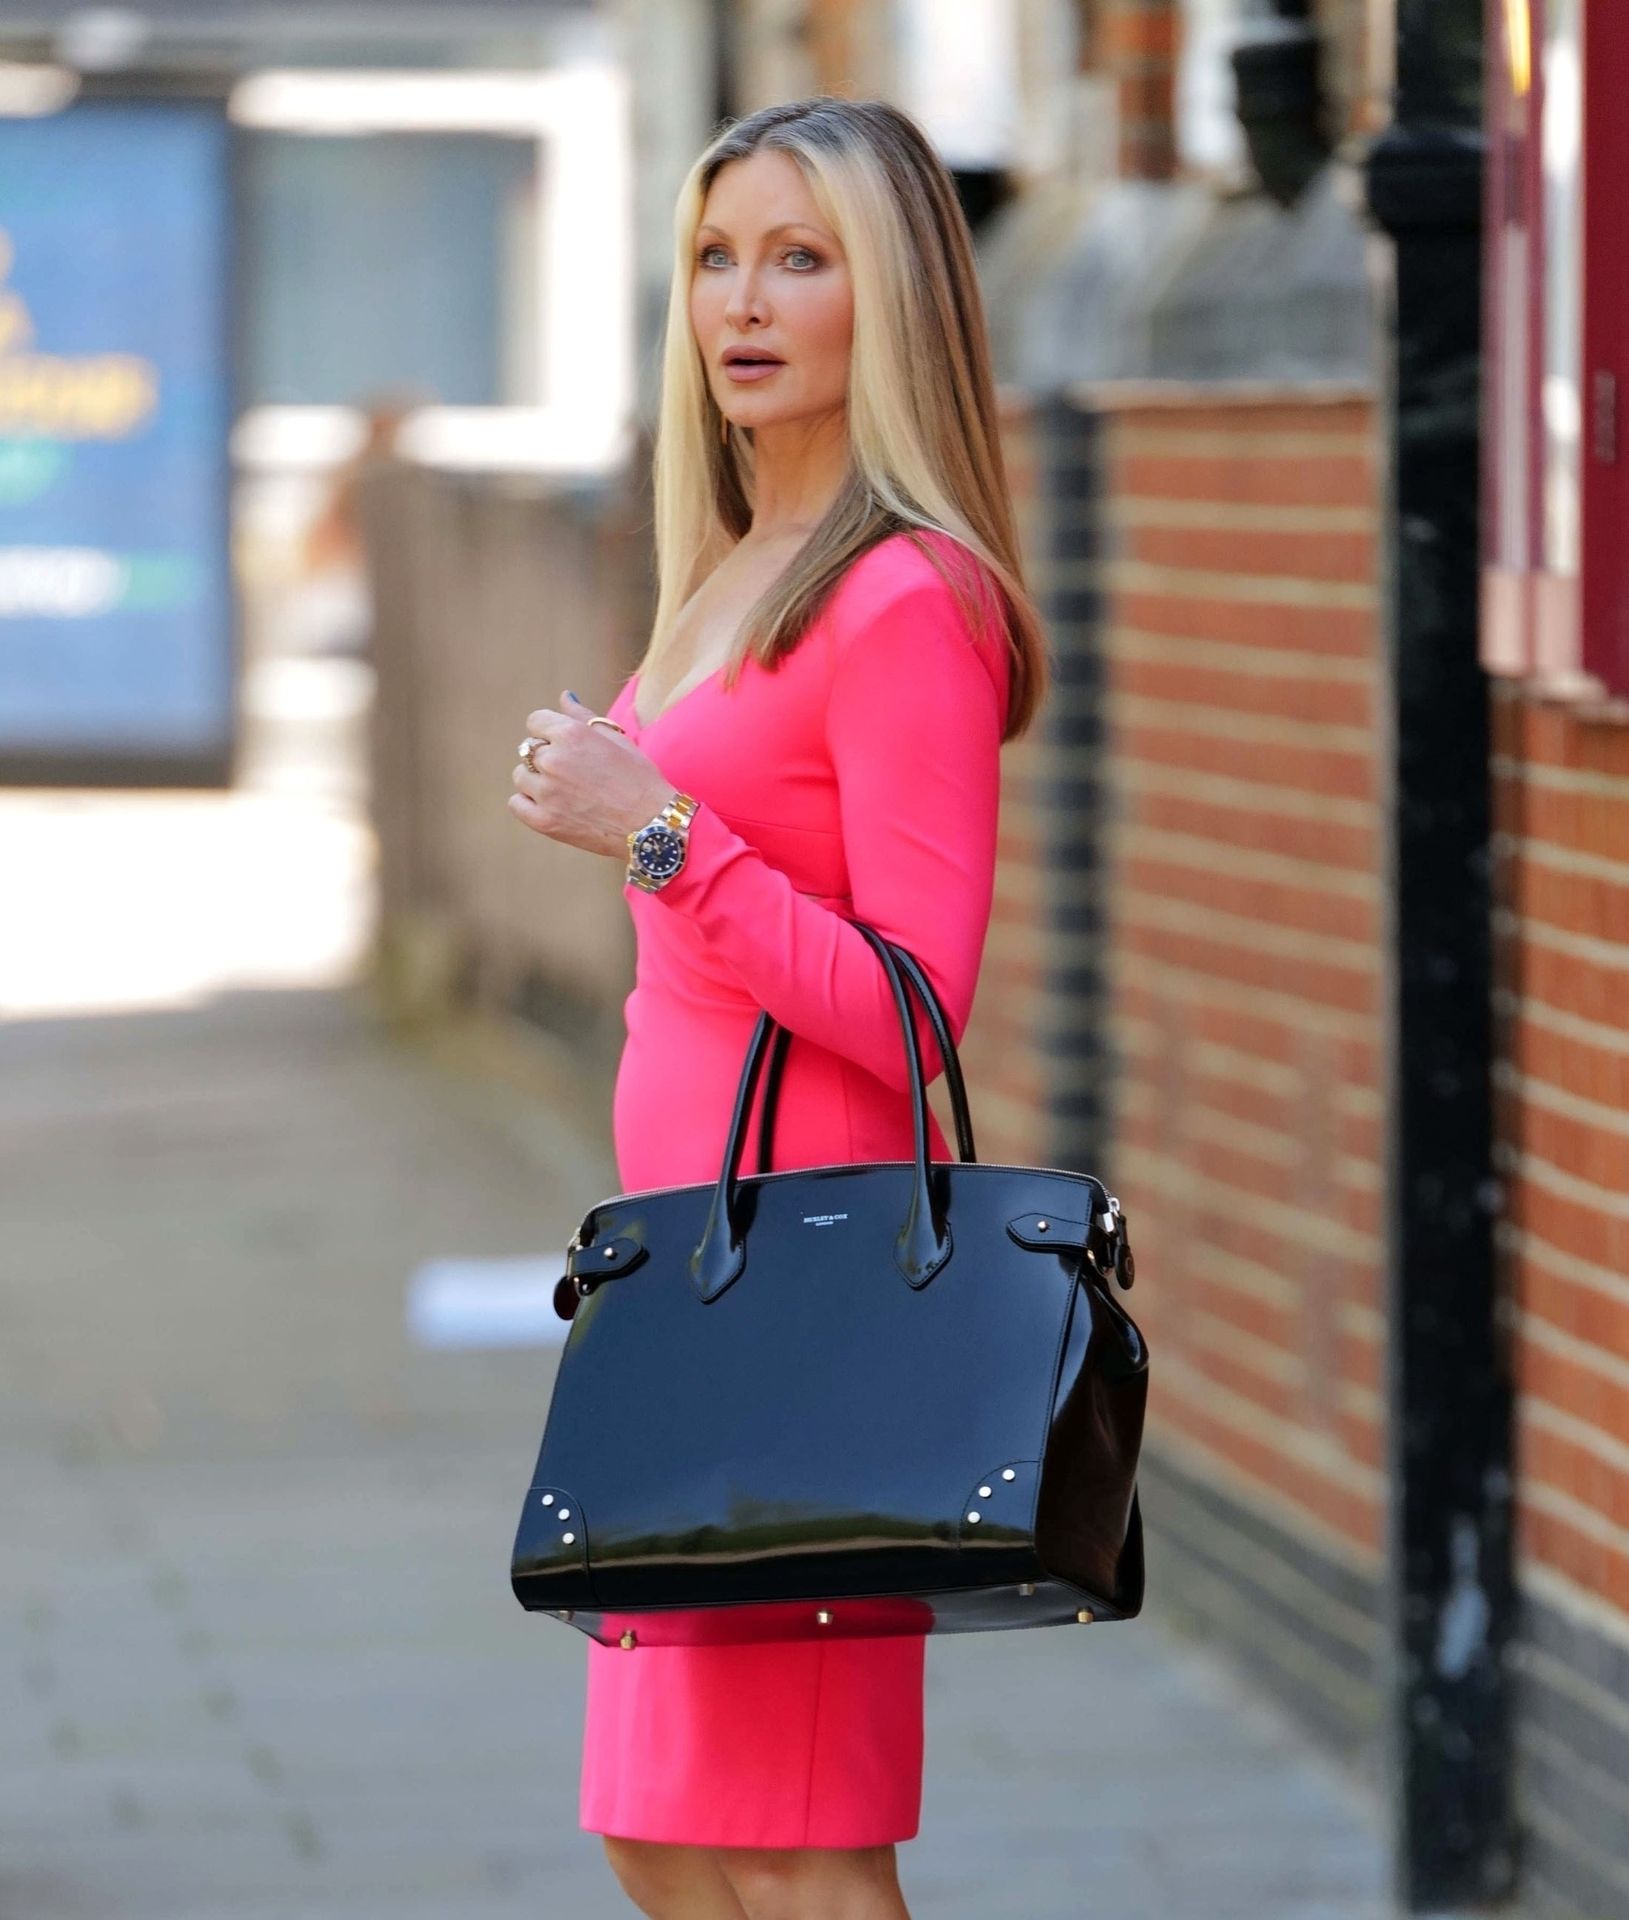 Caprice Wears a Sexy Pink Dress in Central London (8 Photos)